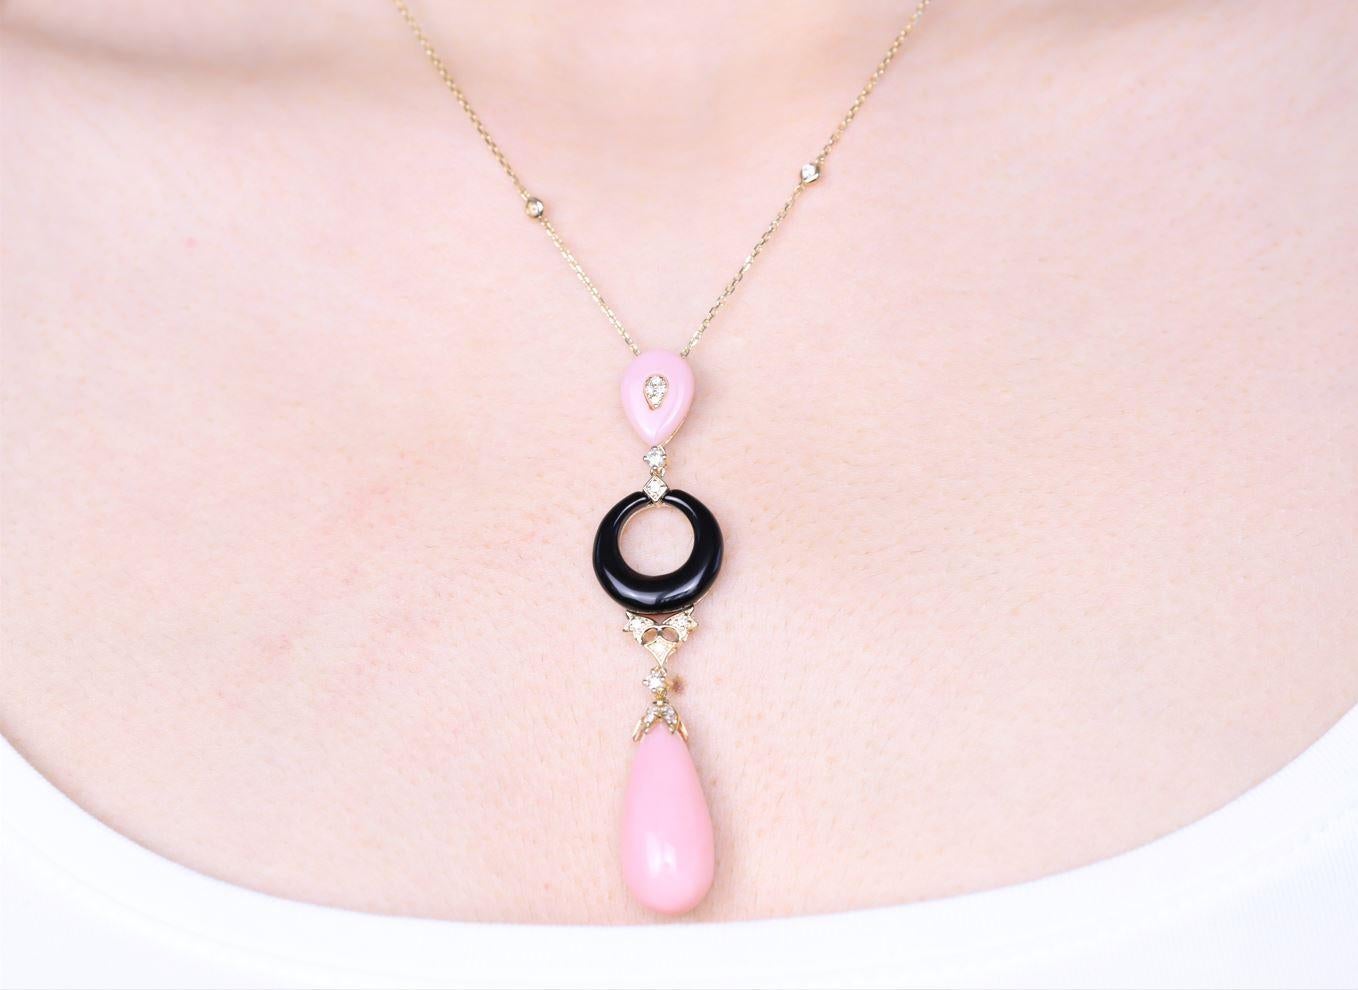 Decorate yourself in elegance with this Necklace is crafted from 14-karat Yellow Gold by Gin & Grace. This Necklace is made up of Pink Opal Pear-Cut (2 pcs) 14.78 carat, Onyx (1 pcs) 3.52 carat, and Round-cut White Diamond (18 Pcs) 0.31 Carat. This